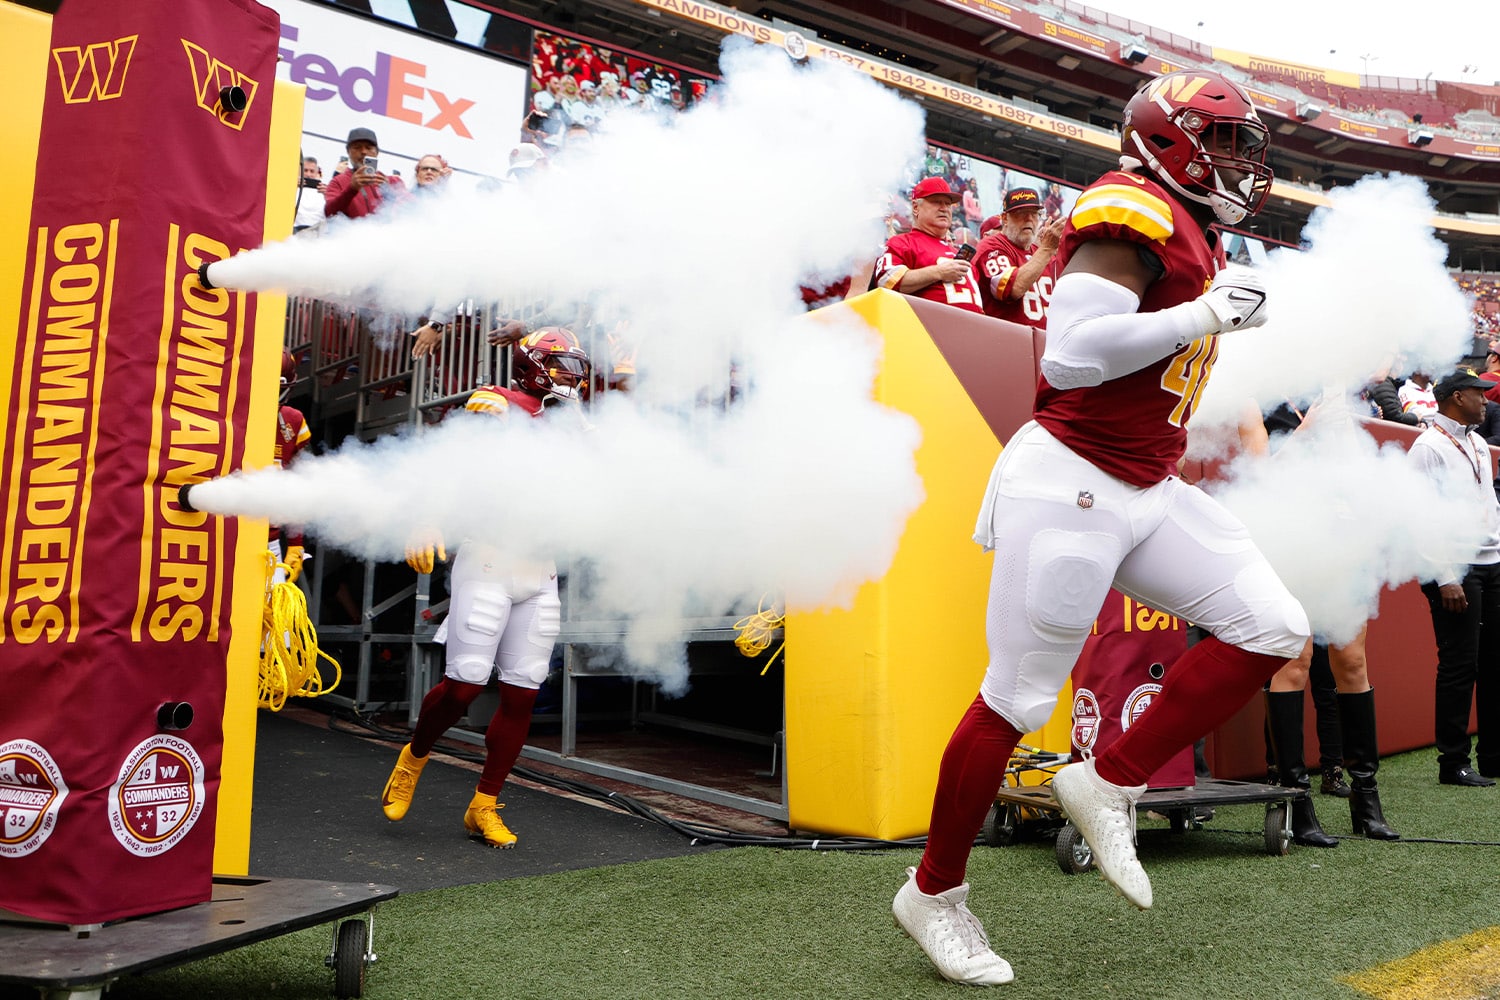 Washington Commanders players run onto the field prior to the game at FedexField